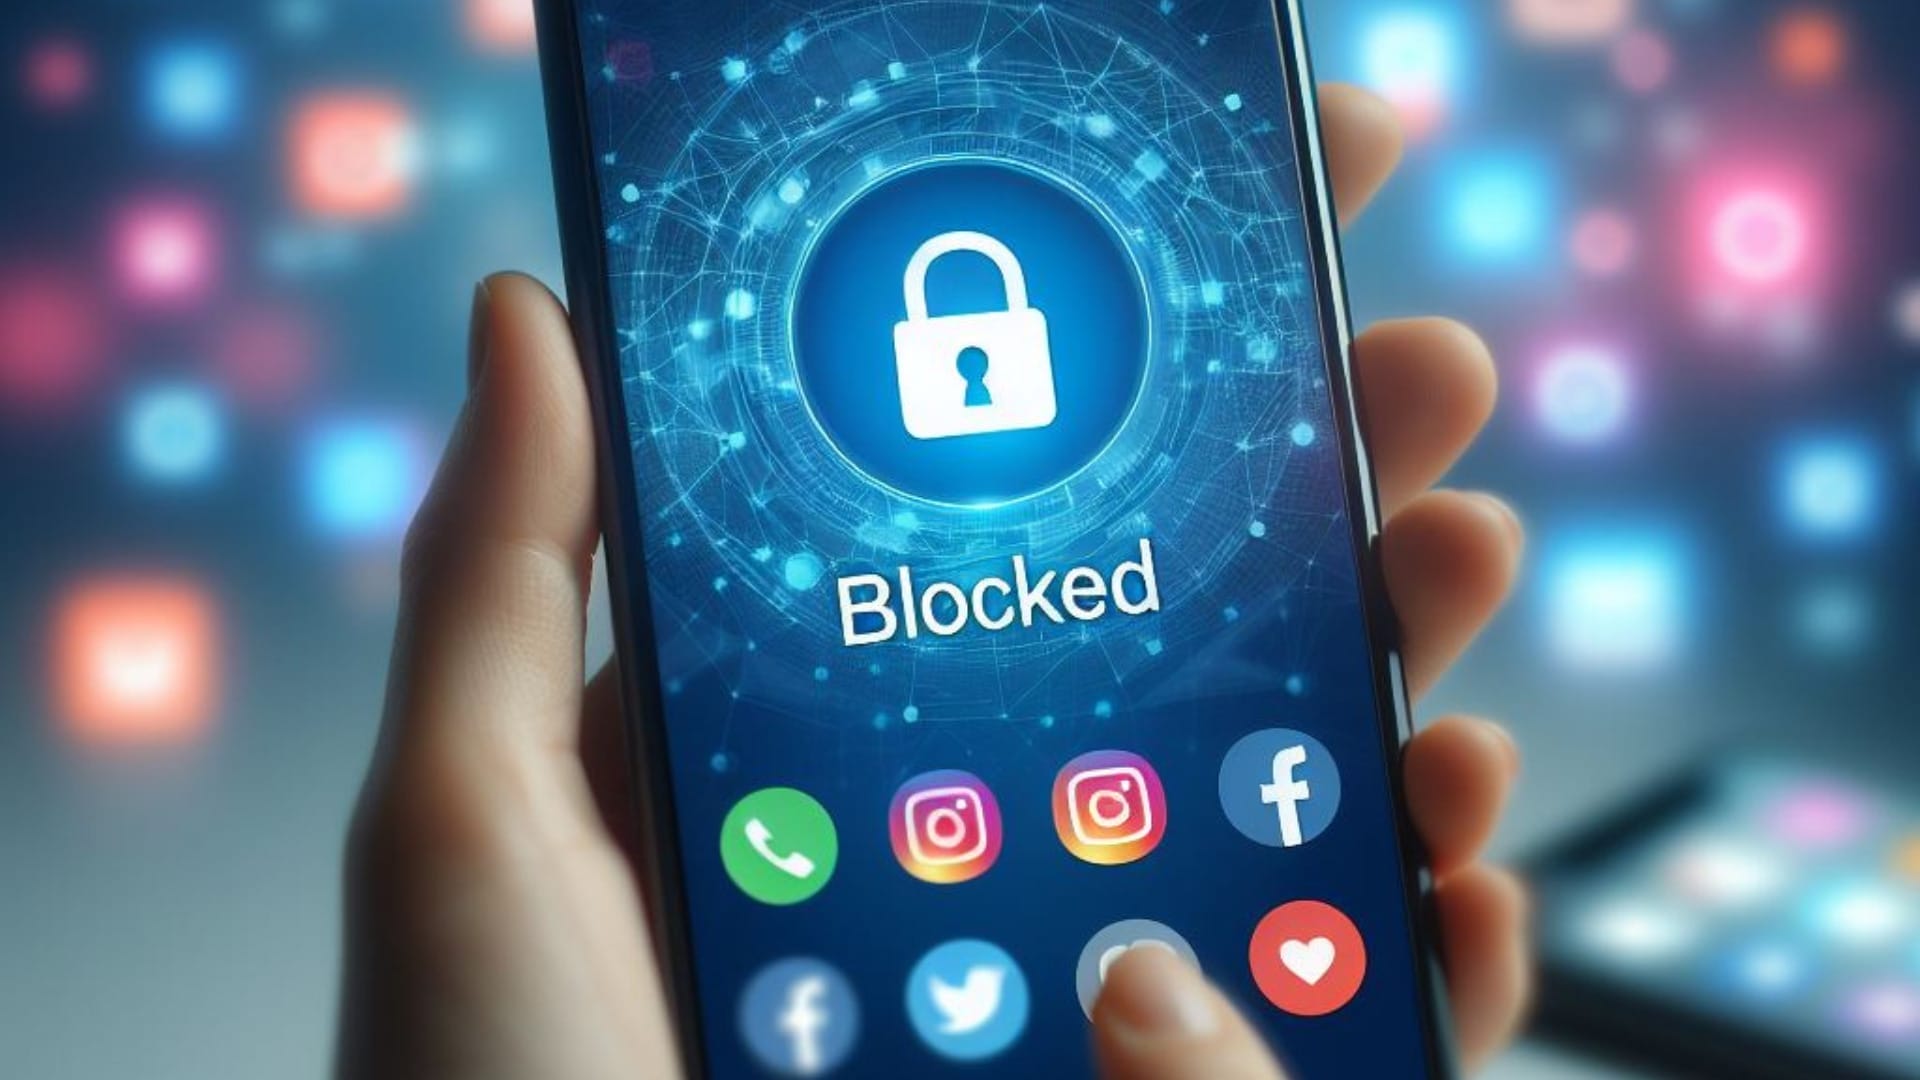 Understanding Relationship Dynamics: Discover what it means when a guy blocks you on a smartphone screen, surrounded by blurred social media icons in the background.